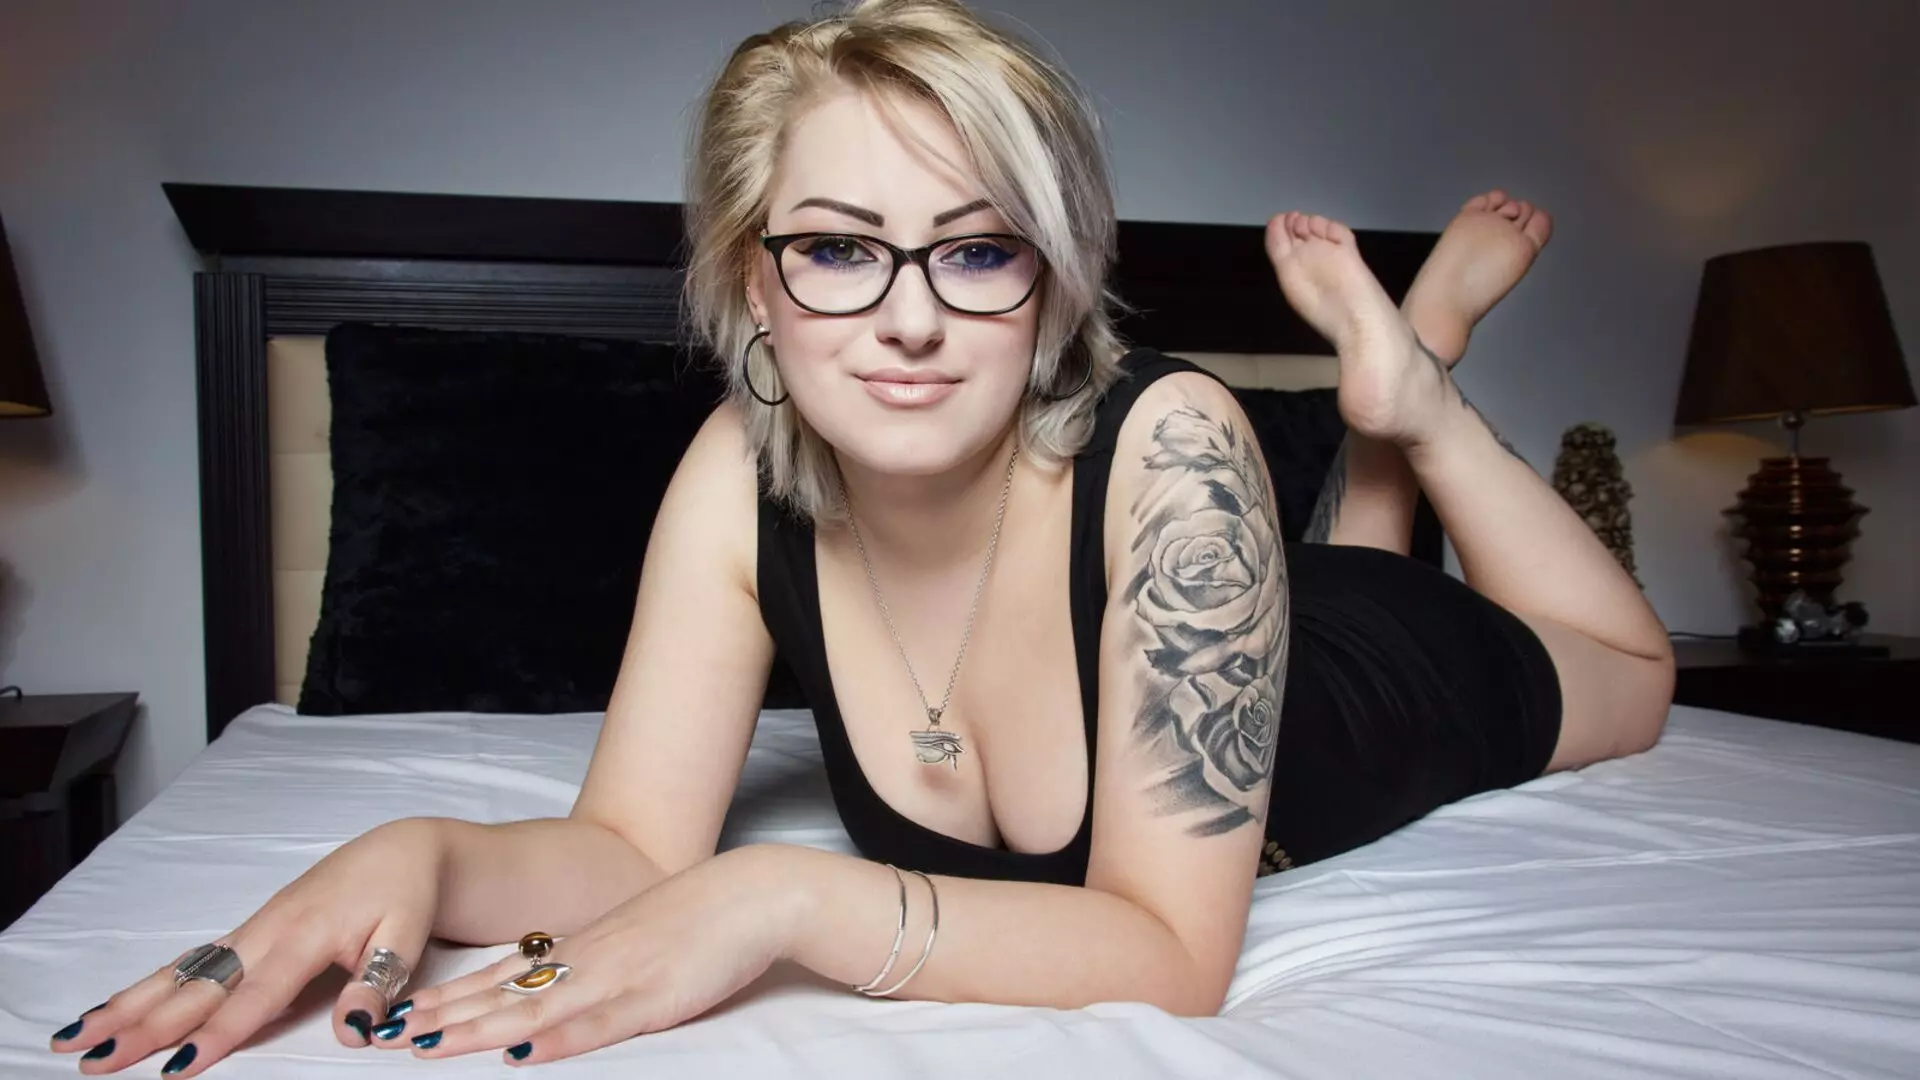 InkedWendy's Live Nude Chat